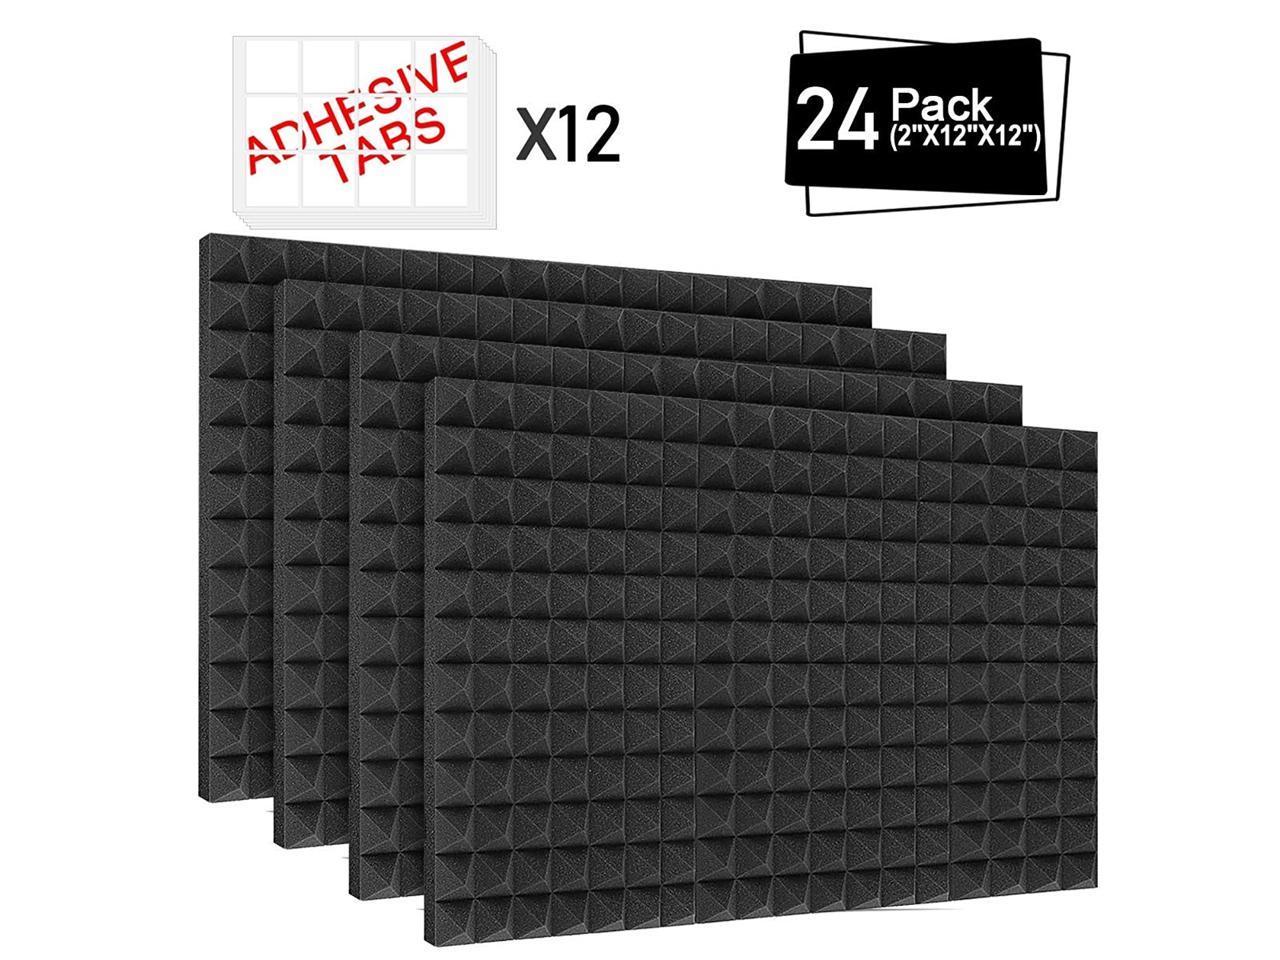 DEKIRU Upgraded 12 Pack Acoustic Panels Great for Wall Decoration and Acoustic Treatment 12 X 12 X 0.4 Inches Sound Proofing Studio Foam Padding High Density Bevled Edge Tiles Soundproofing Panels 